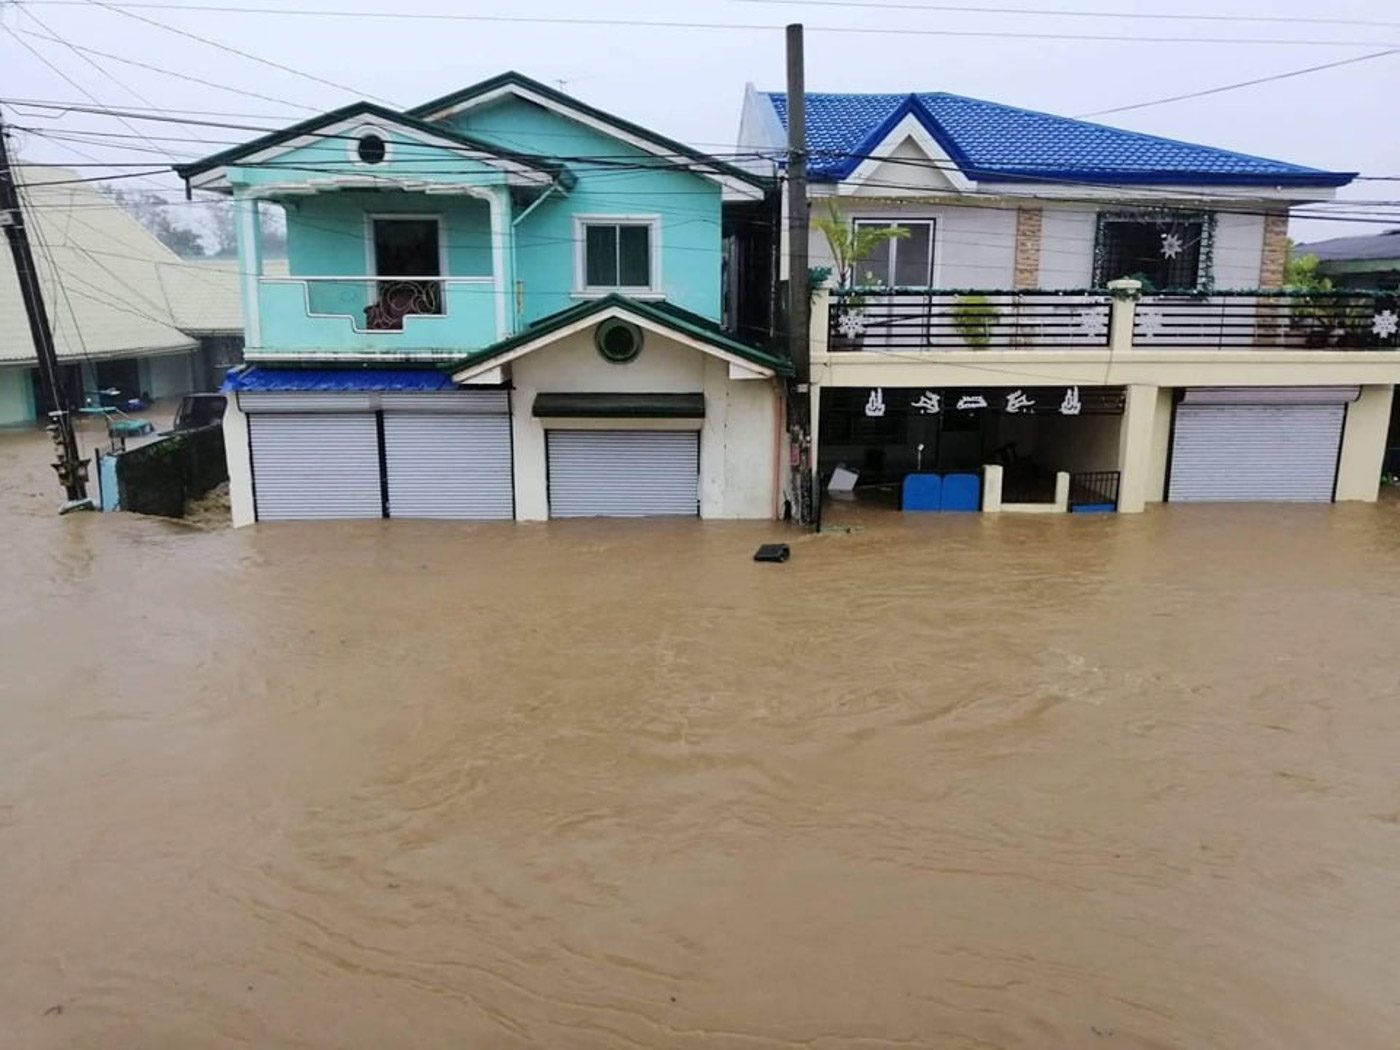 IN PHOTOS: Typhoon Ursula brings Christmas Day floods to Visayas provinces